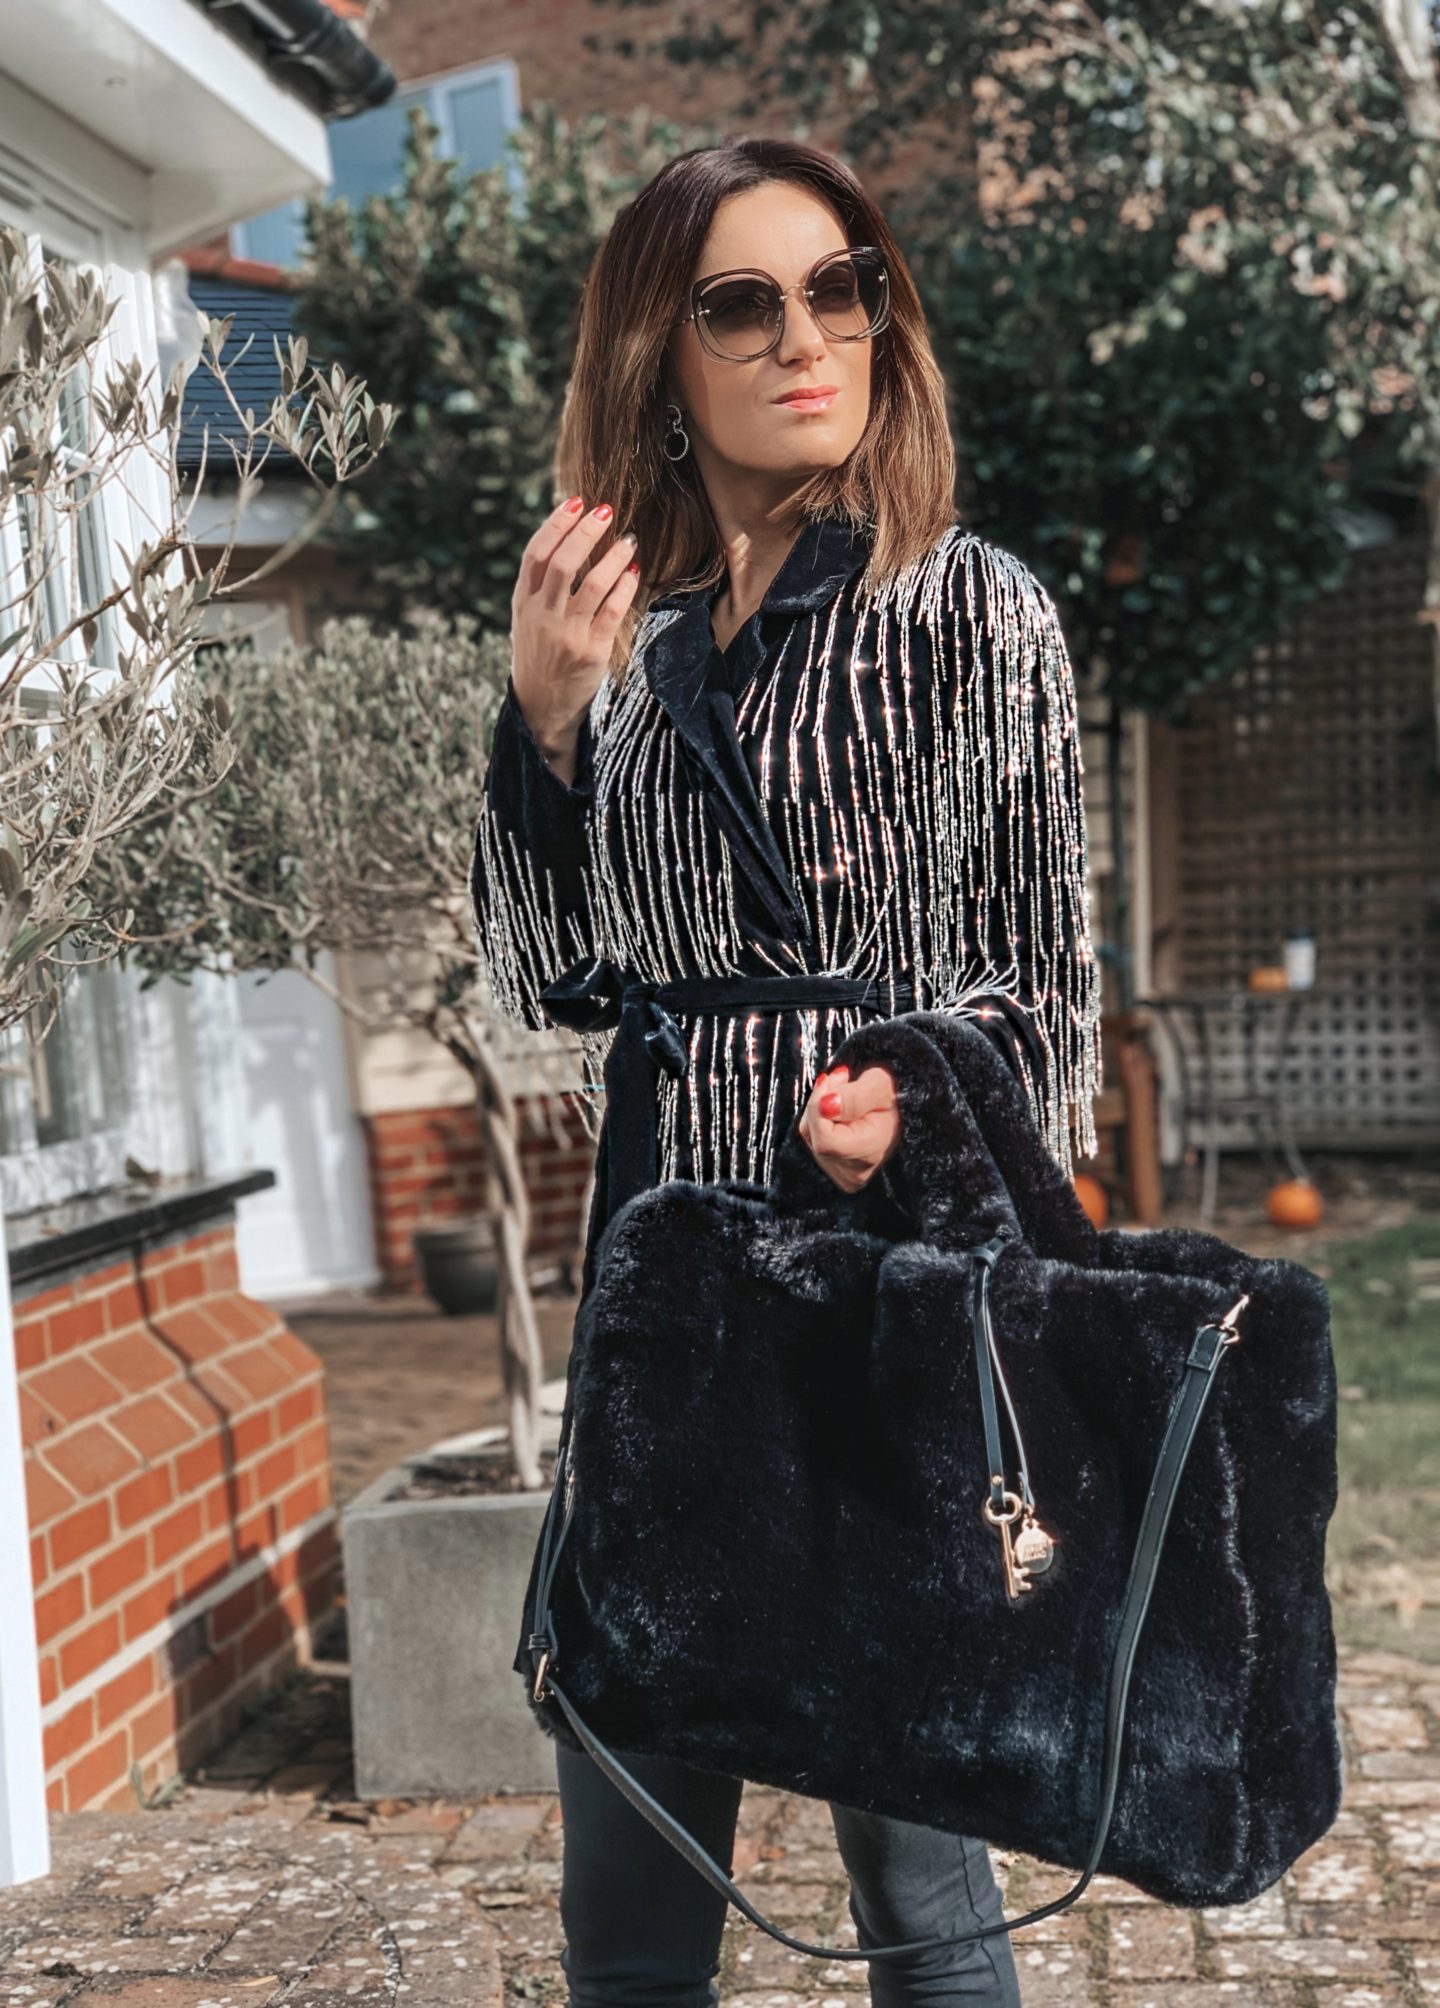 A/W19 Fashion trends Sparkles, fringe and sequins, oversized bags